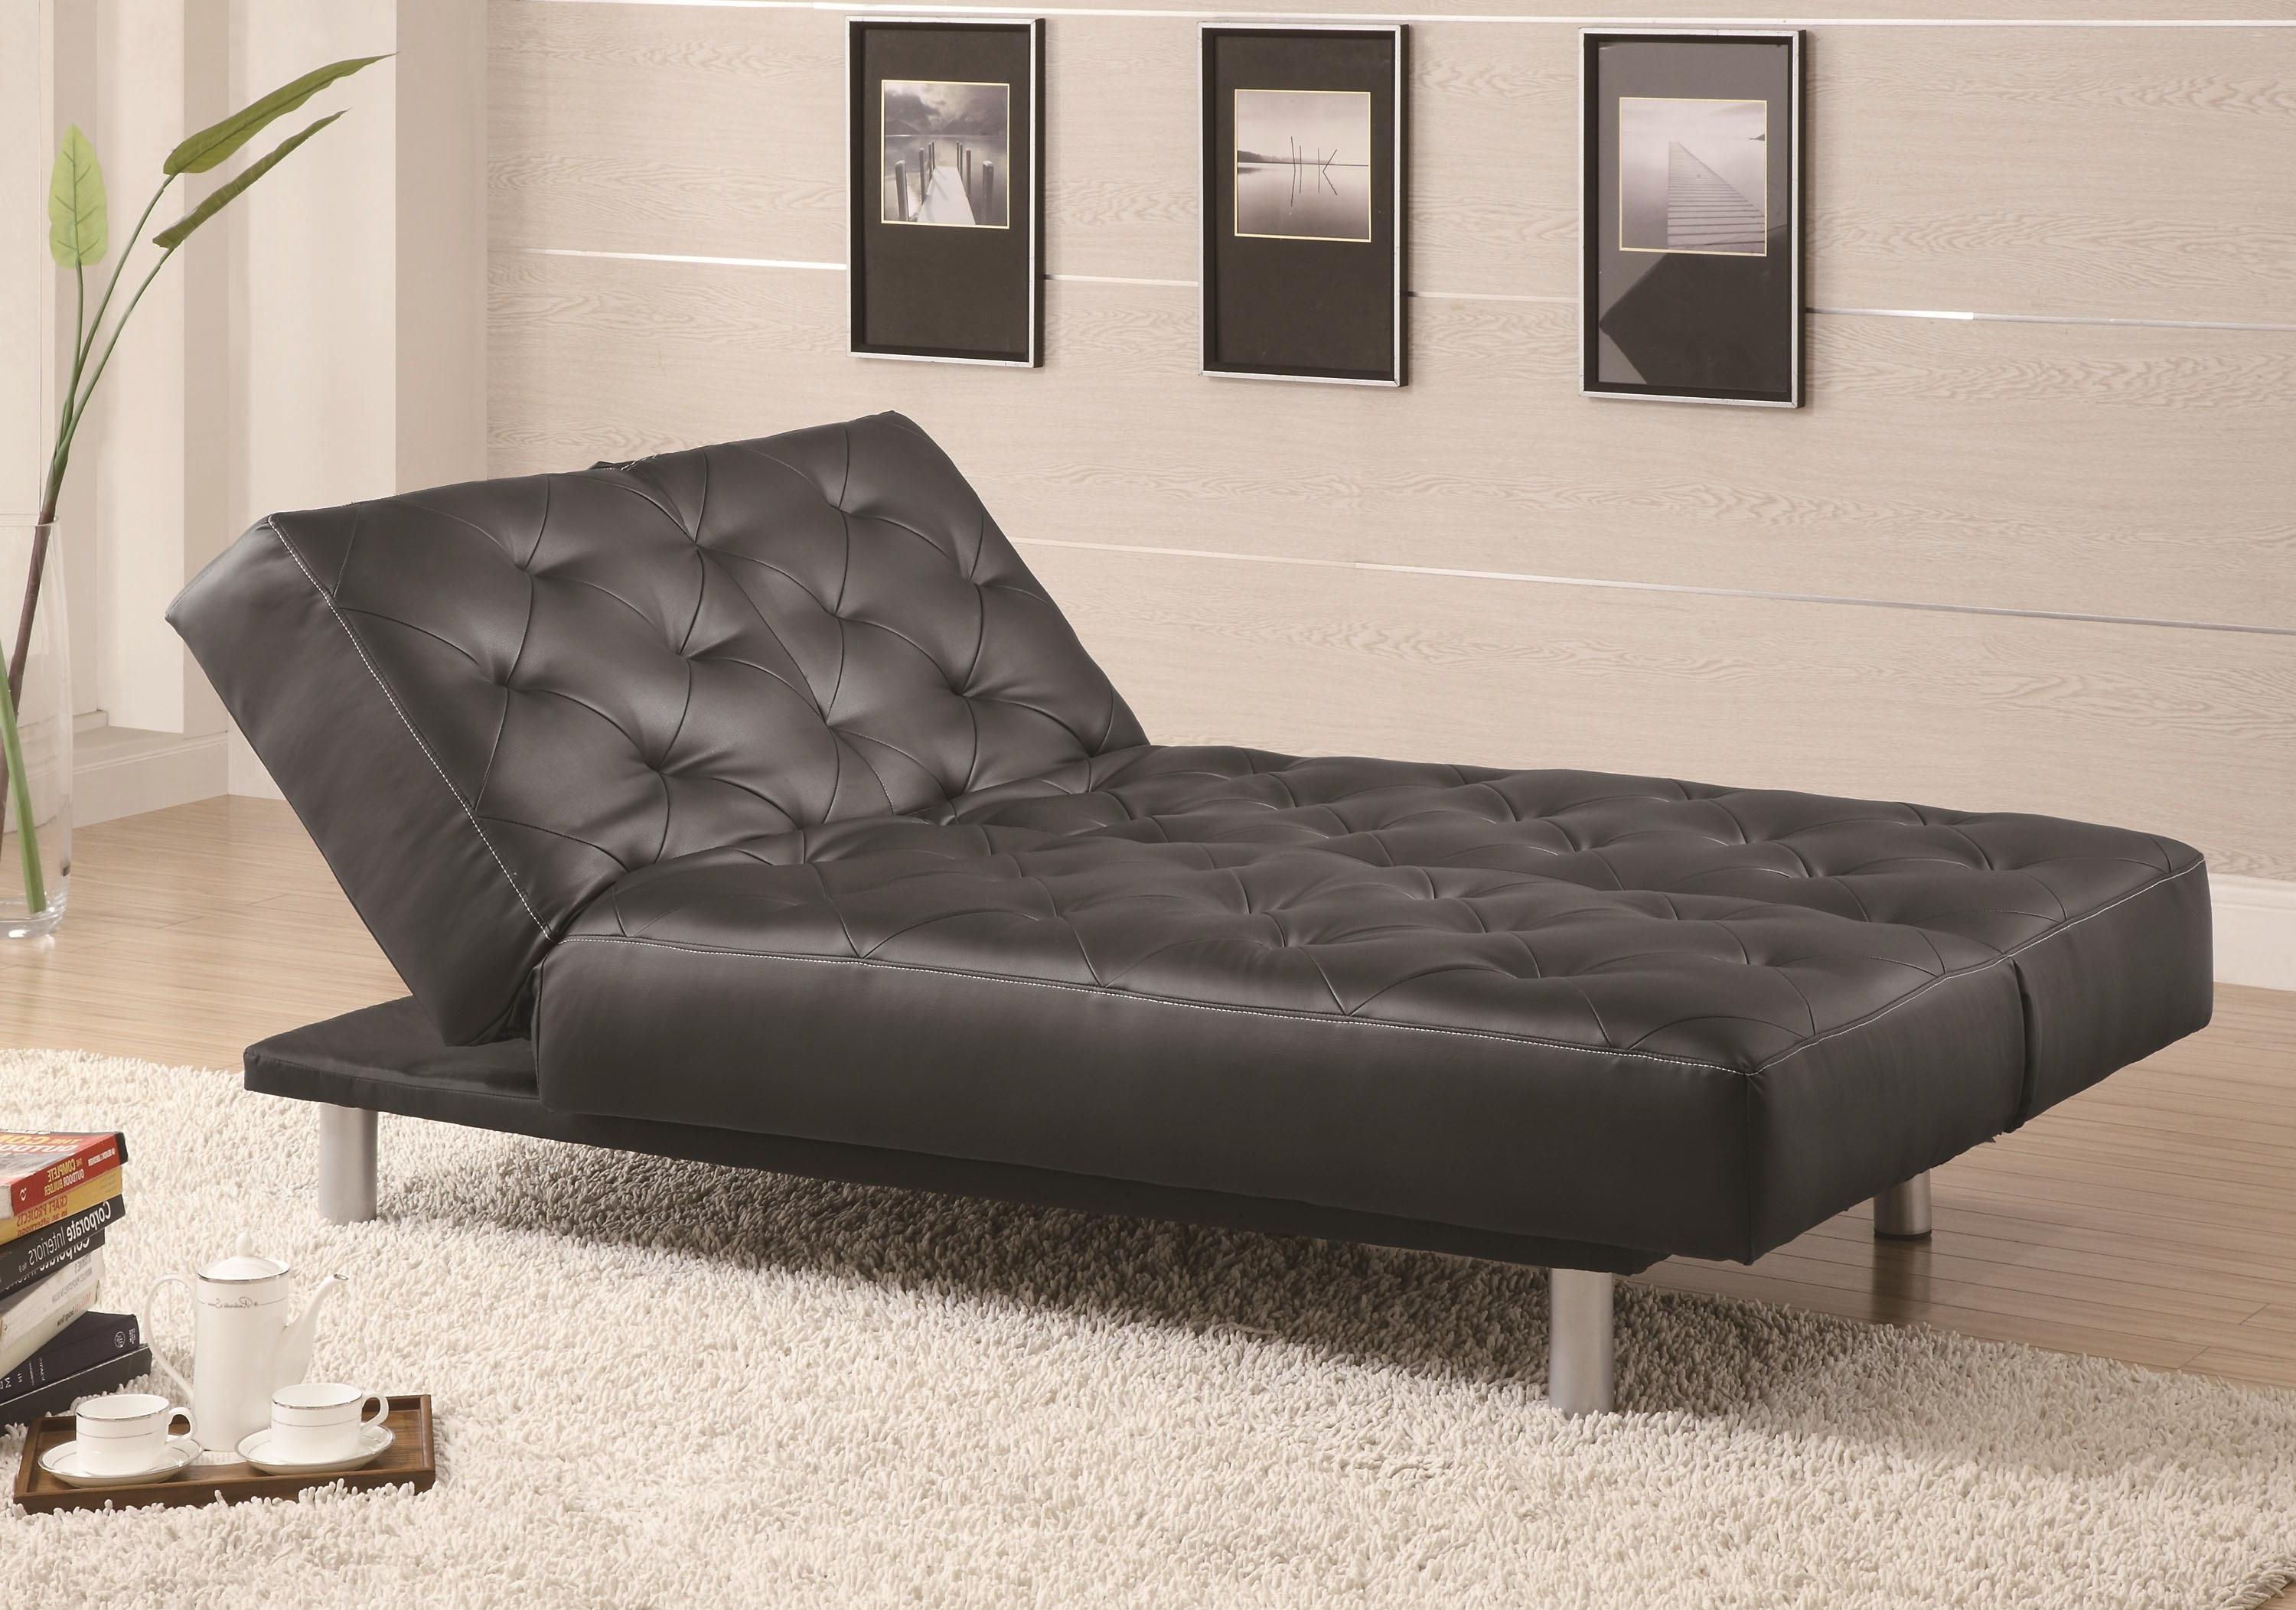 Coaster Sofa Beds And Futons Black Vinyl Tufted Sofa Bed/oversize With 2017 Futons With Chaise Lounge (View 8 of 15)